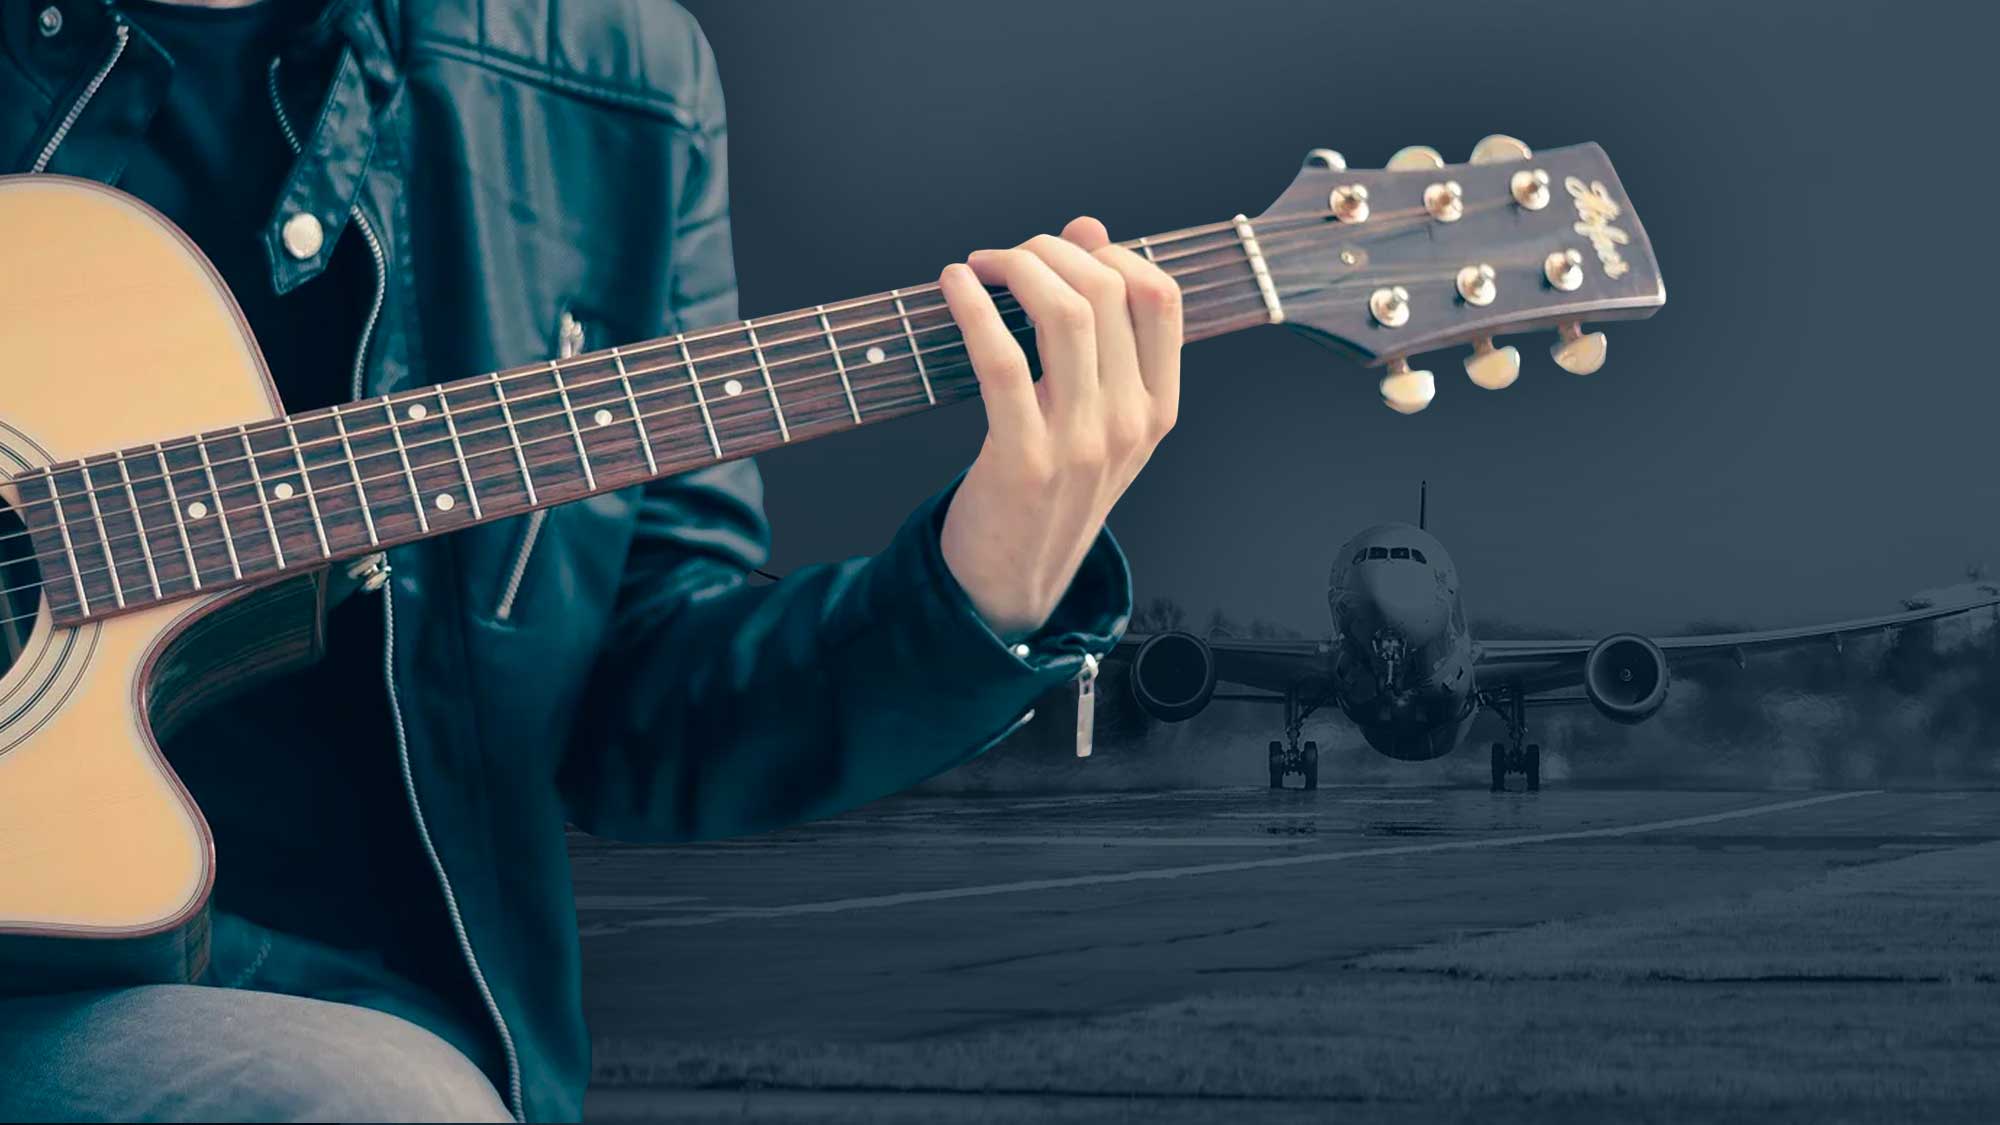 United Airlines In A PR Nightmare After "United Breaks Guitars" Music Video Goes Viral